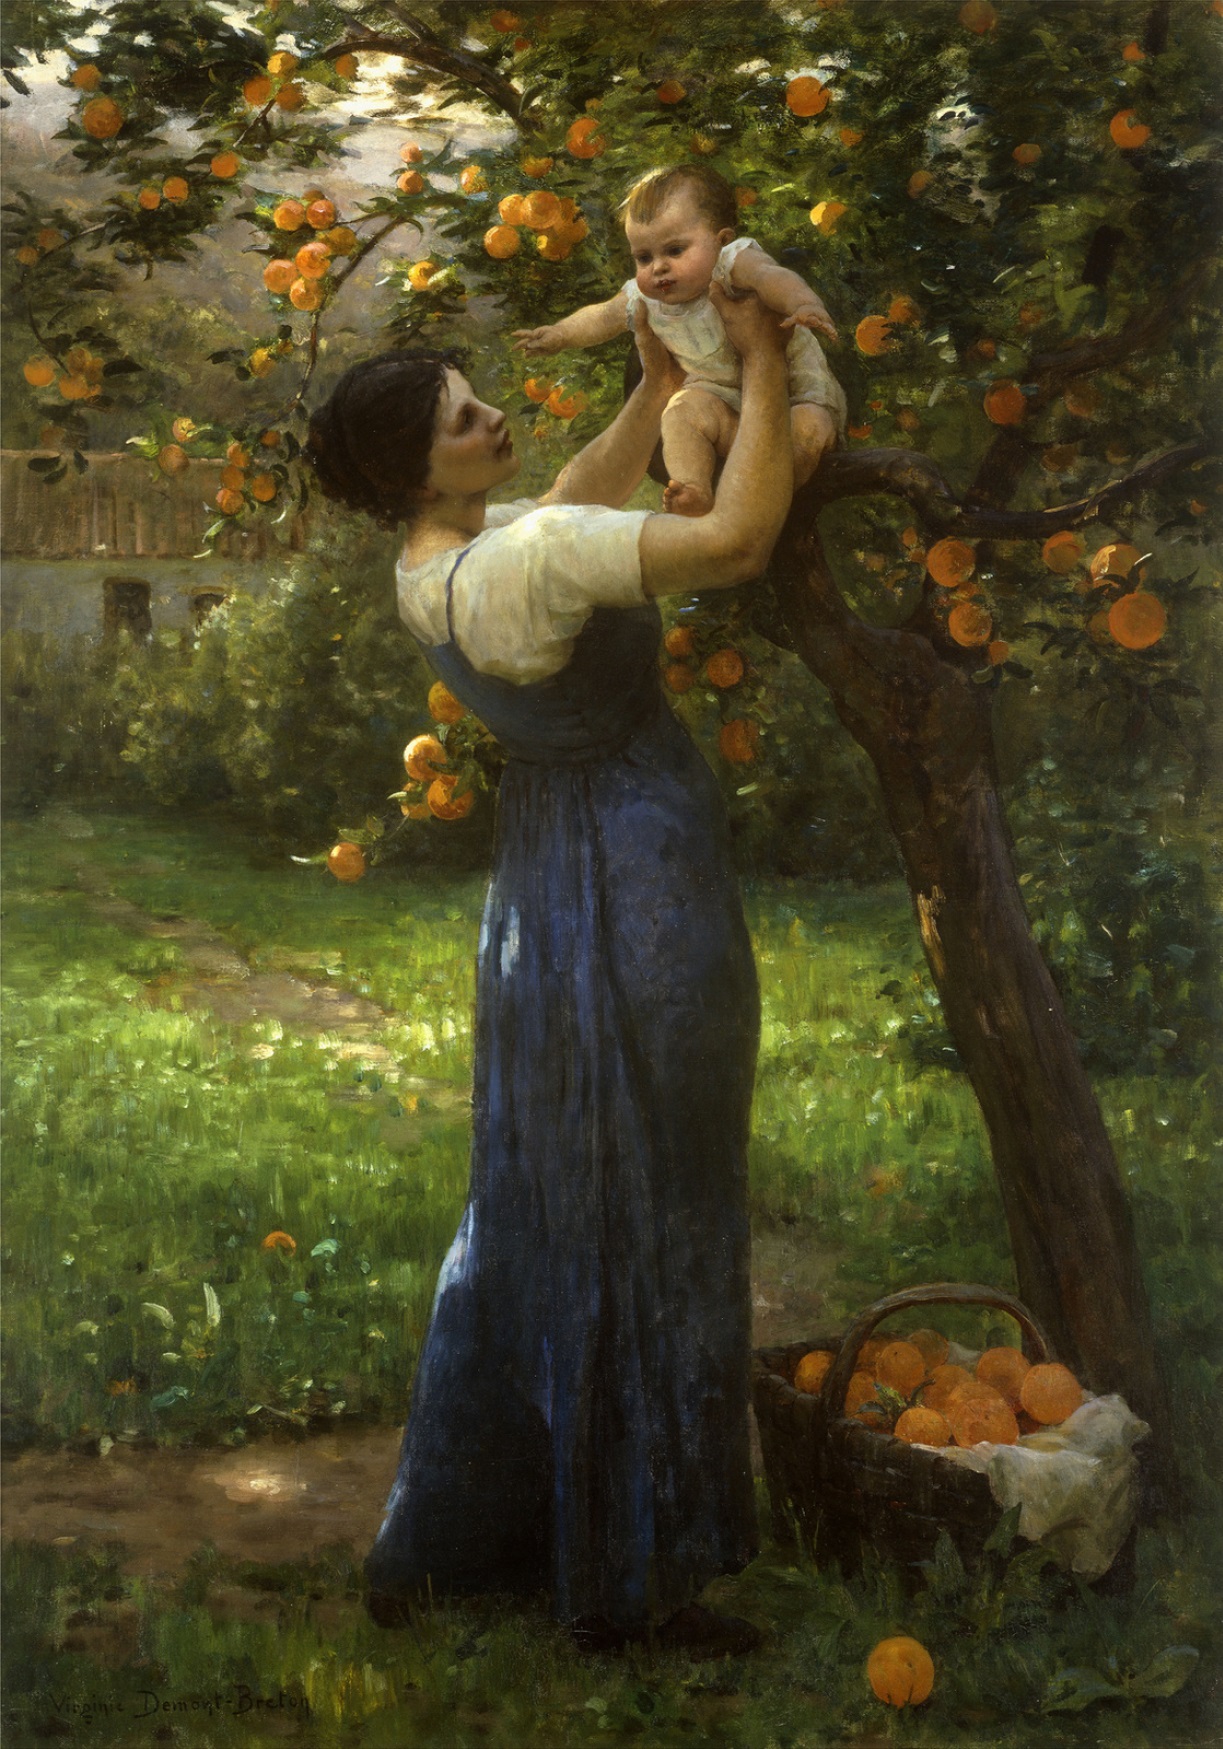 A mother holding up her infant child in an orange grove beside a tree with a basket of oranges at her feet